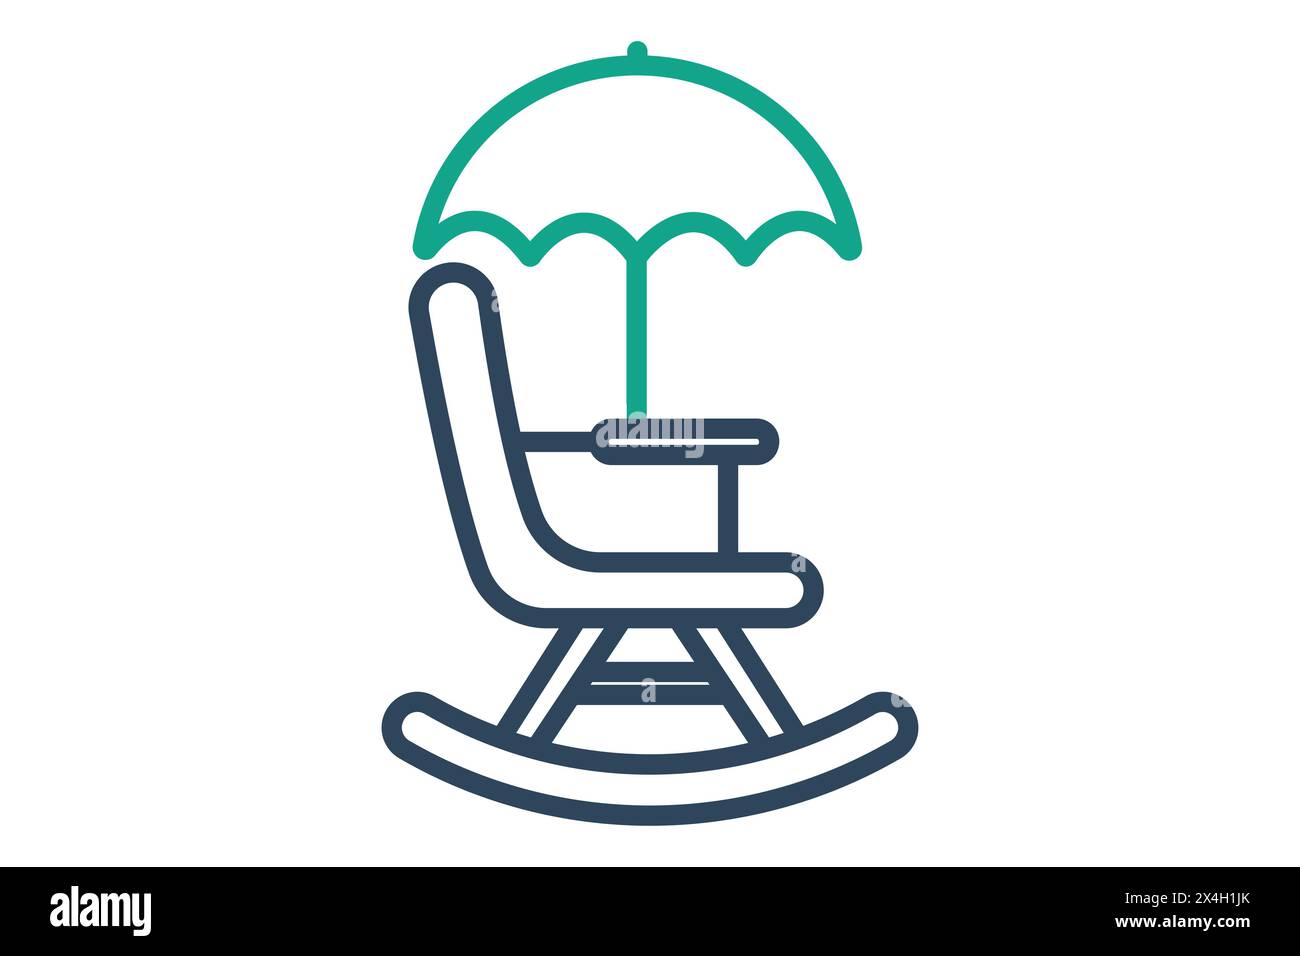 pension icon. rocking chair with umbrella. icon related to elderly. line icon style. old age element illustration Stock Vector